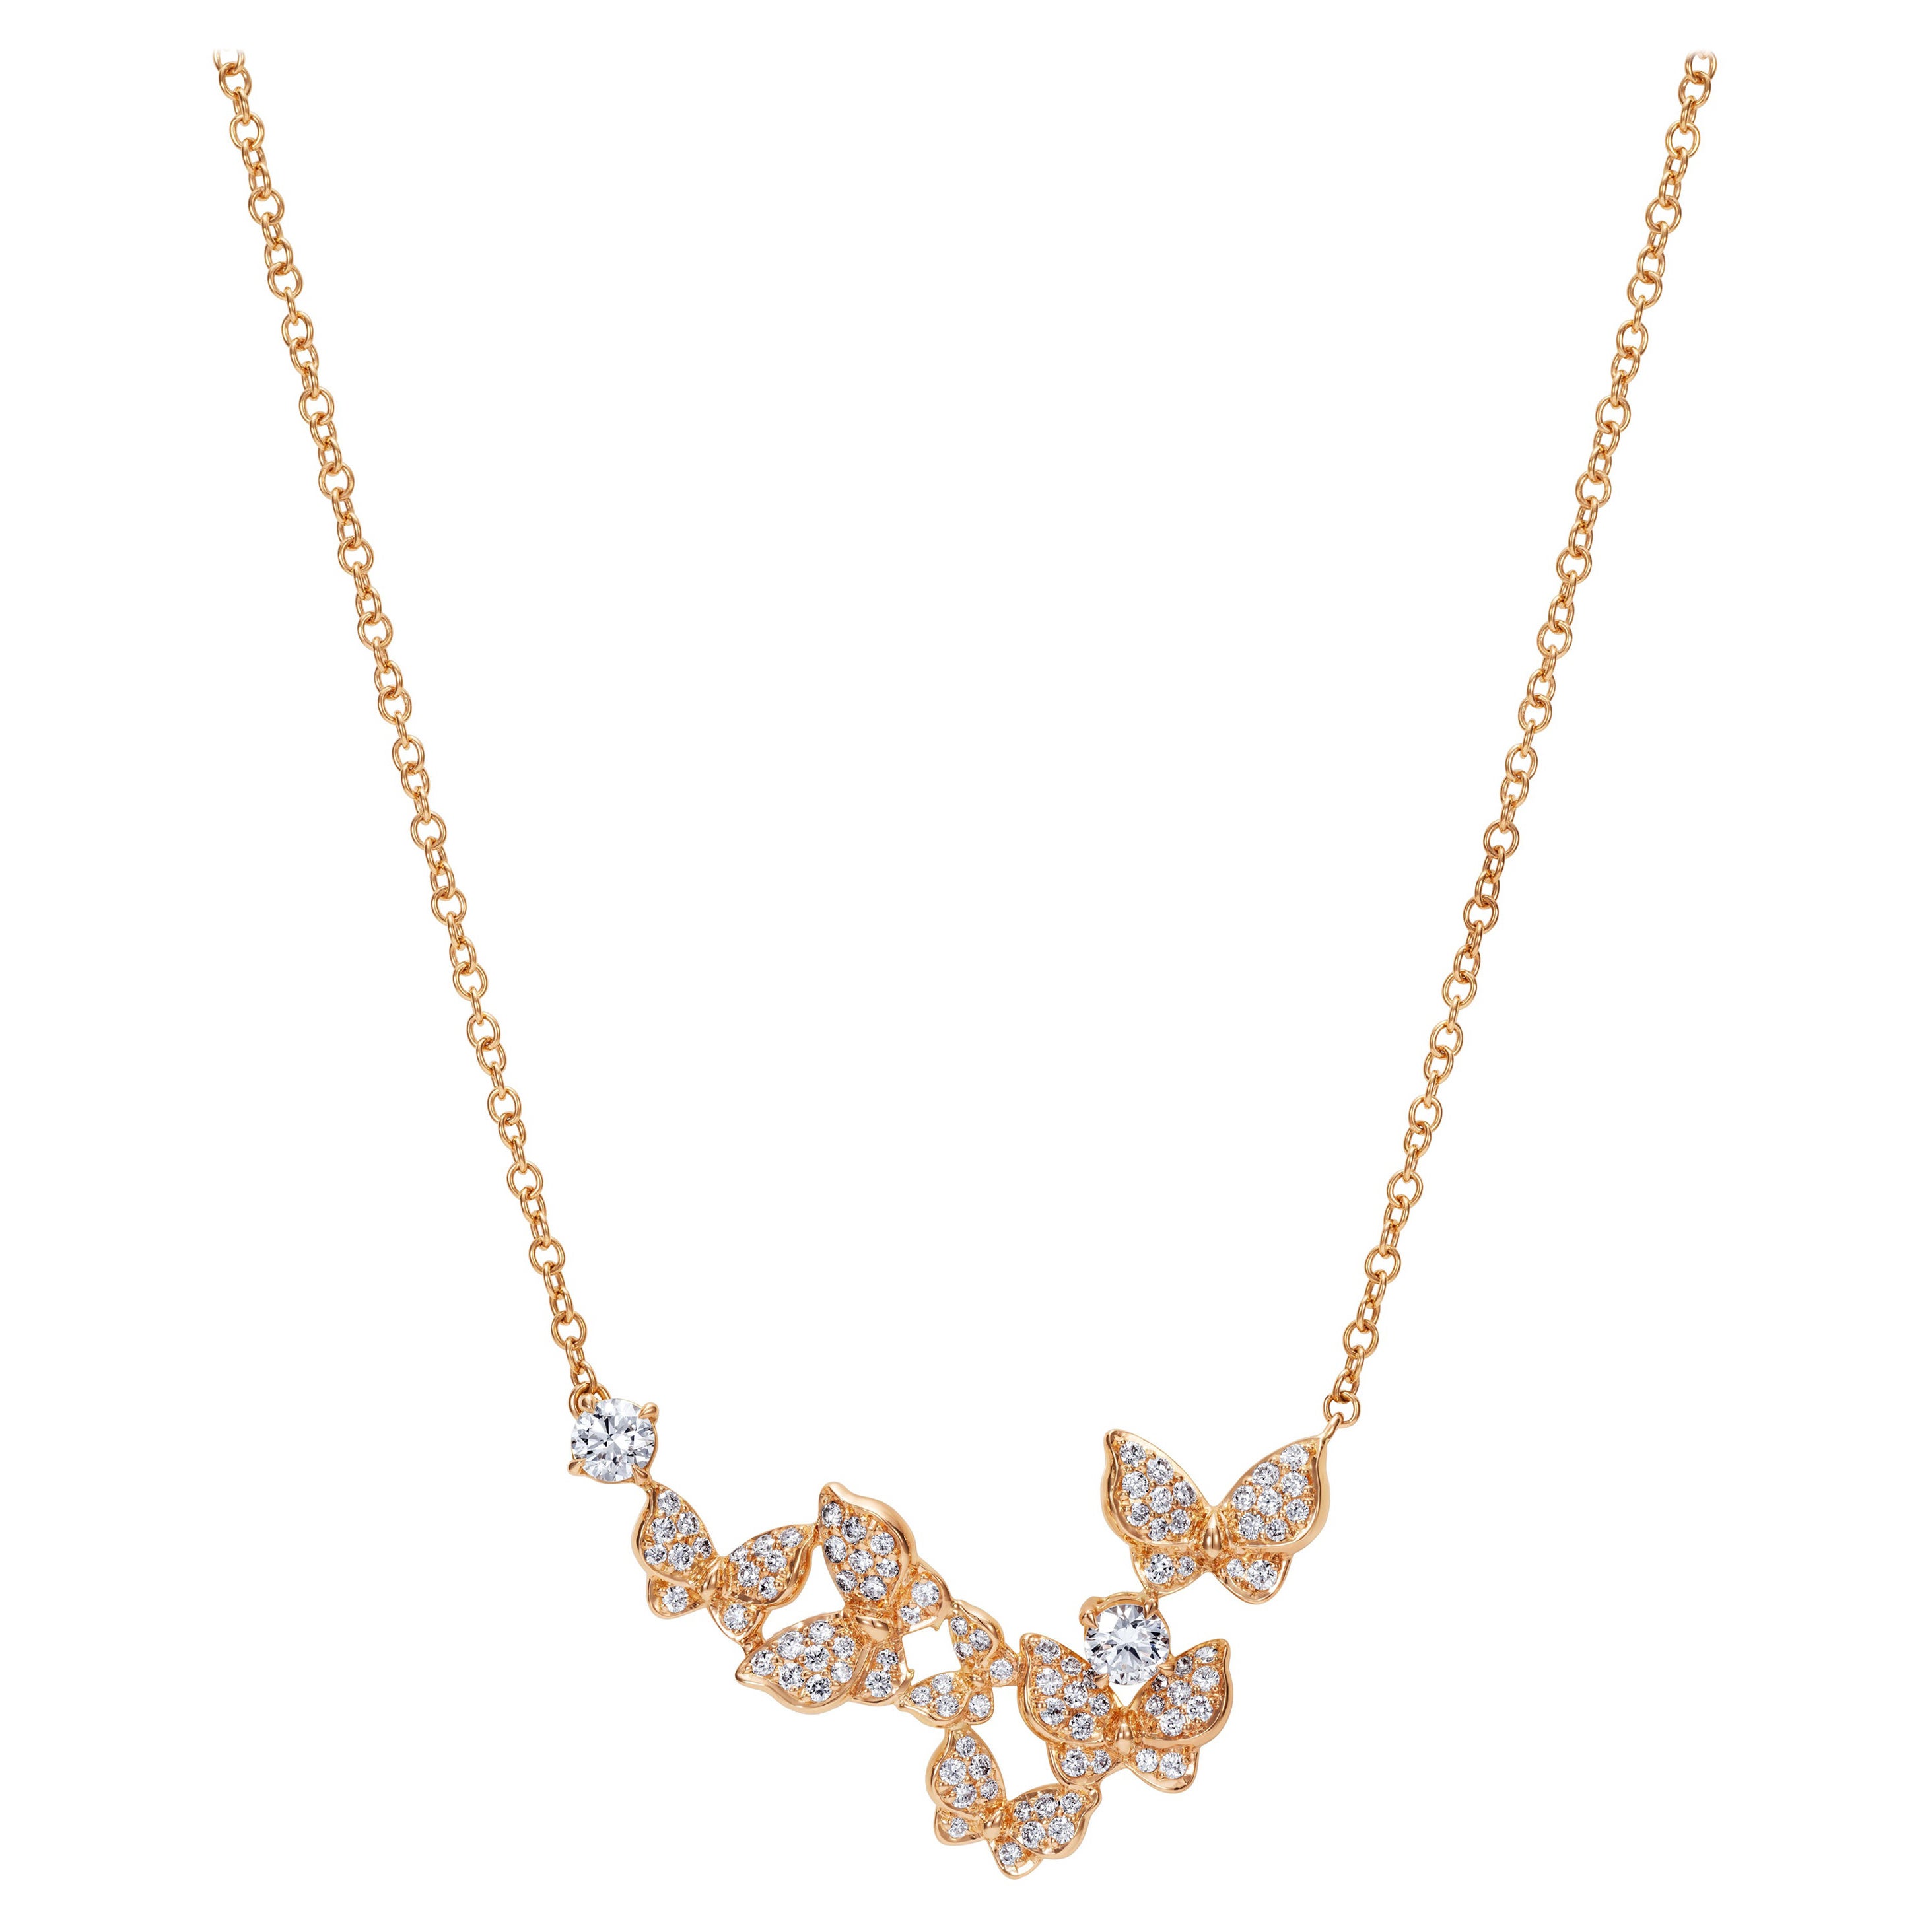 18 Karat Rose Gold and White Diamonds Butterfly Necklace